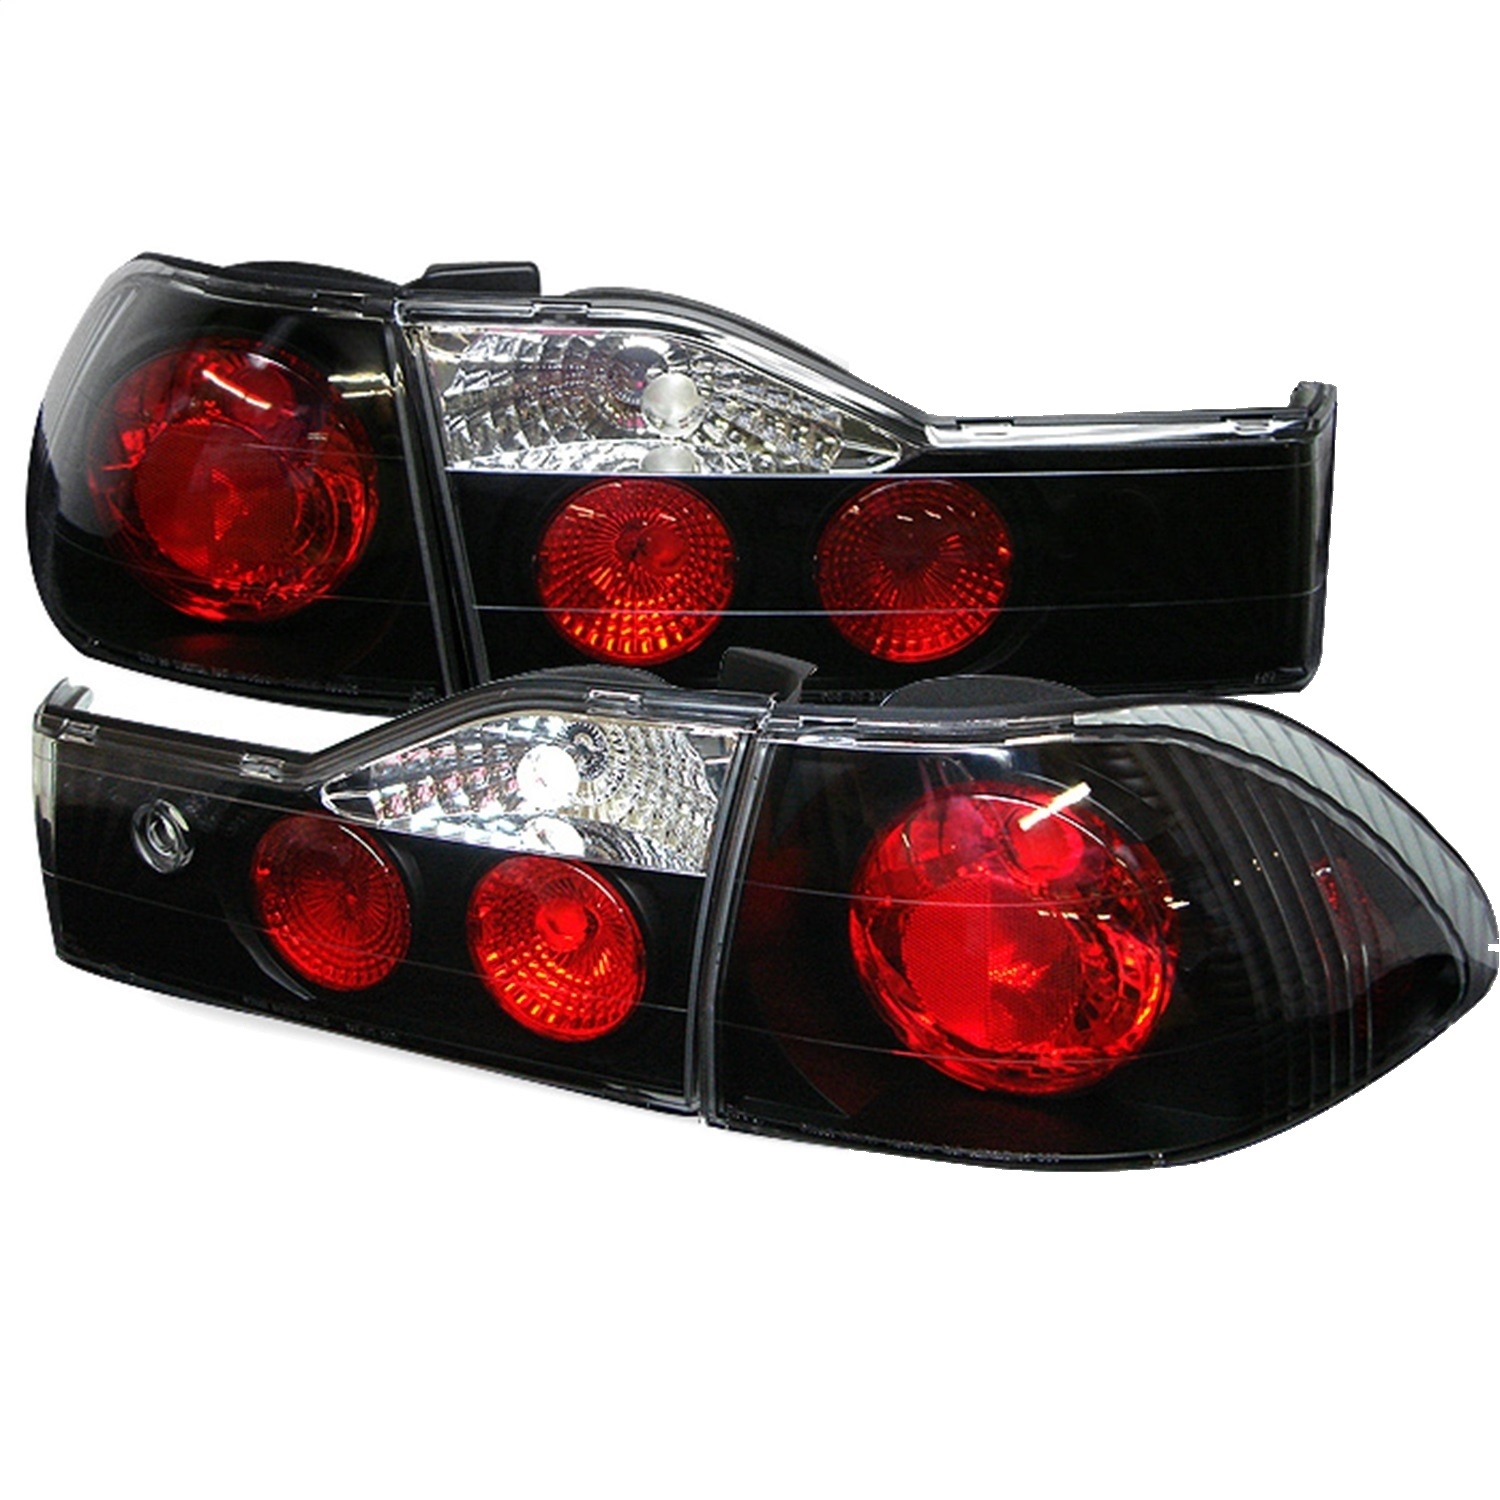 Spyder Auto 5003959 Euro Style Tail Lights Fits 01-02 Accord